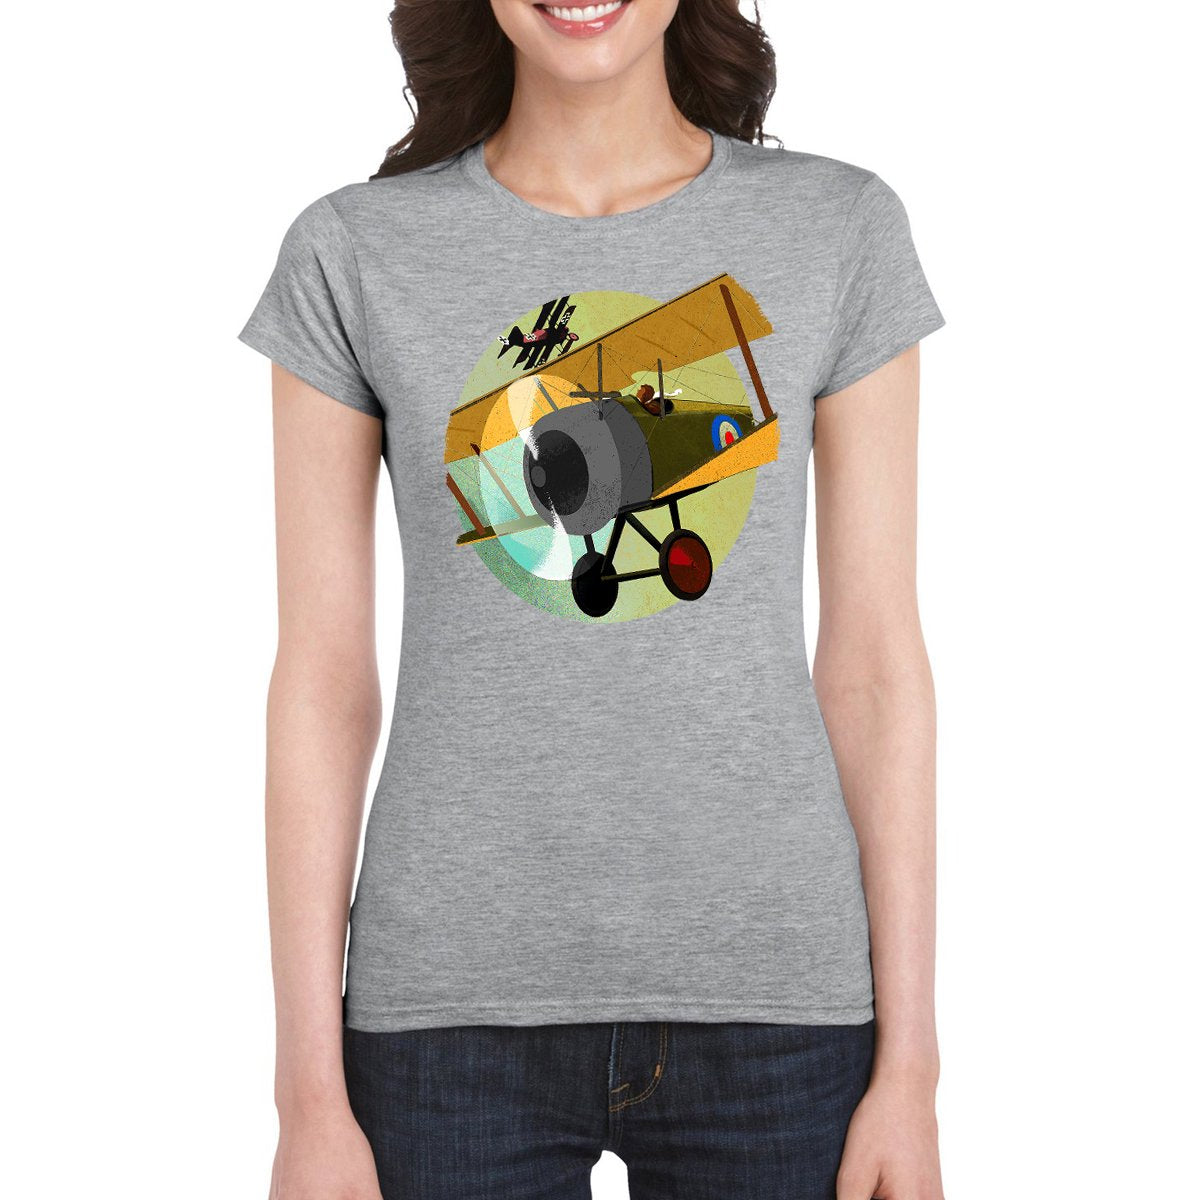 TALLY-HO Women's Semi-Fitted T-Shirt